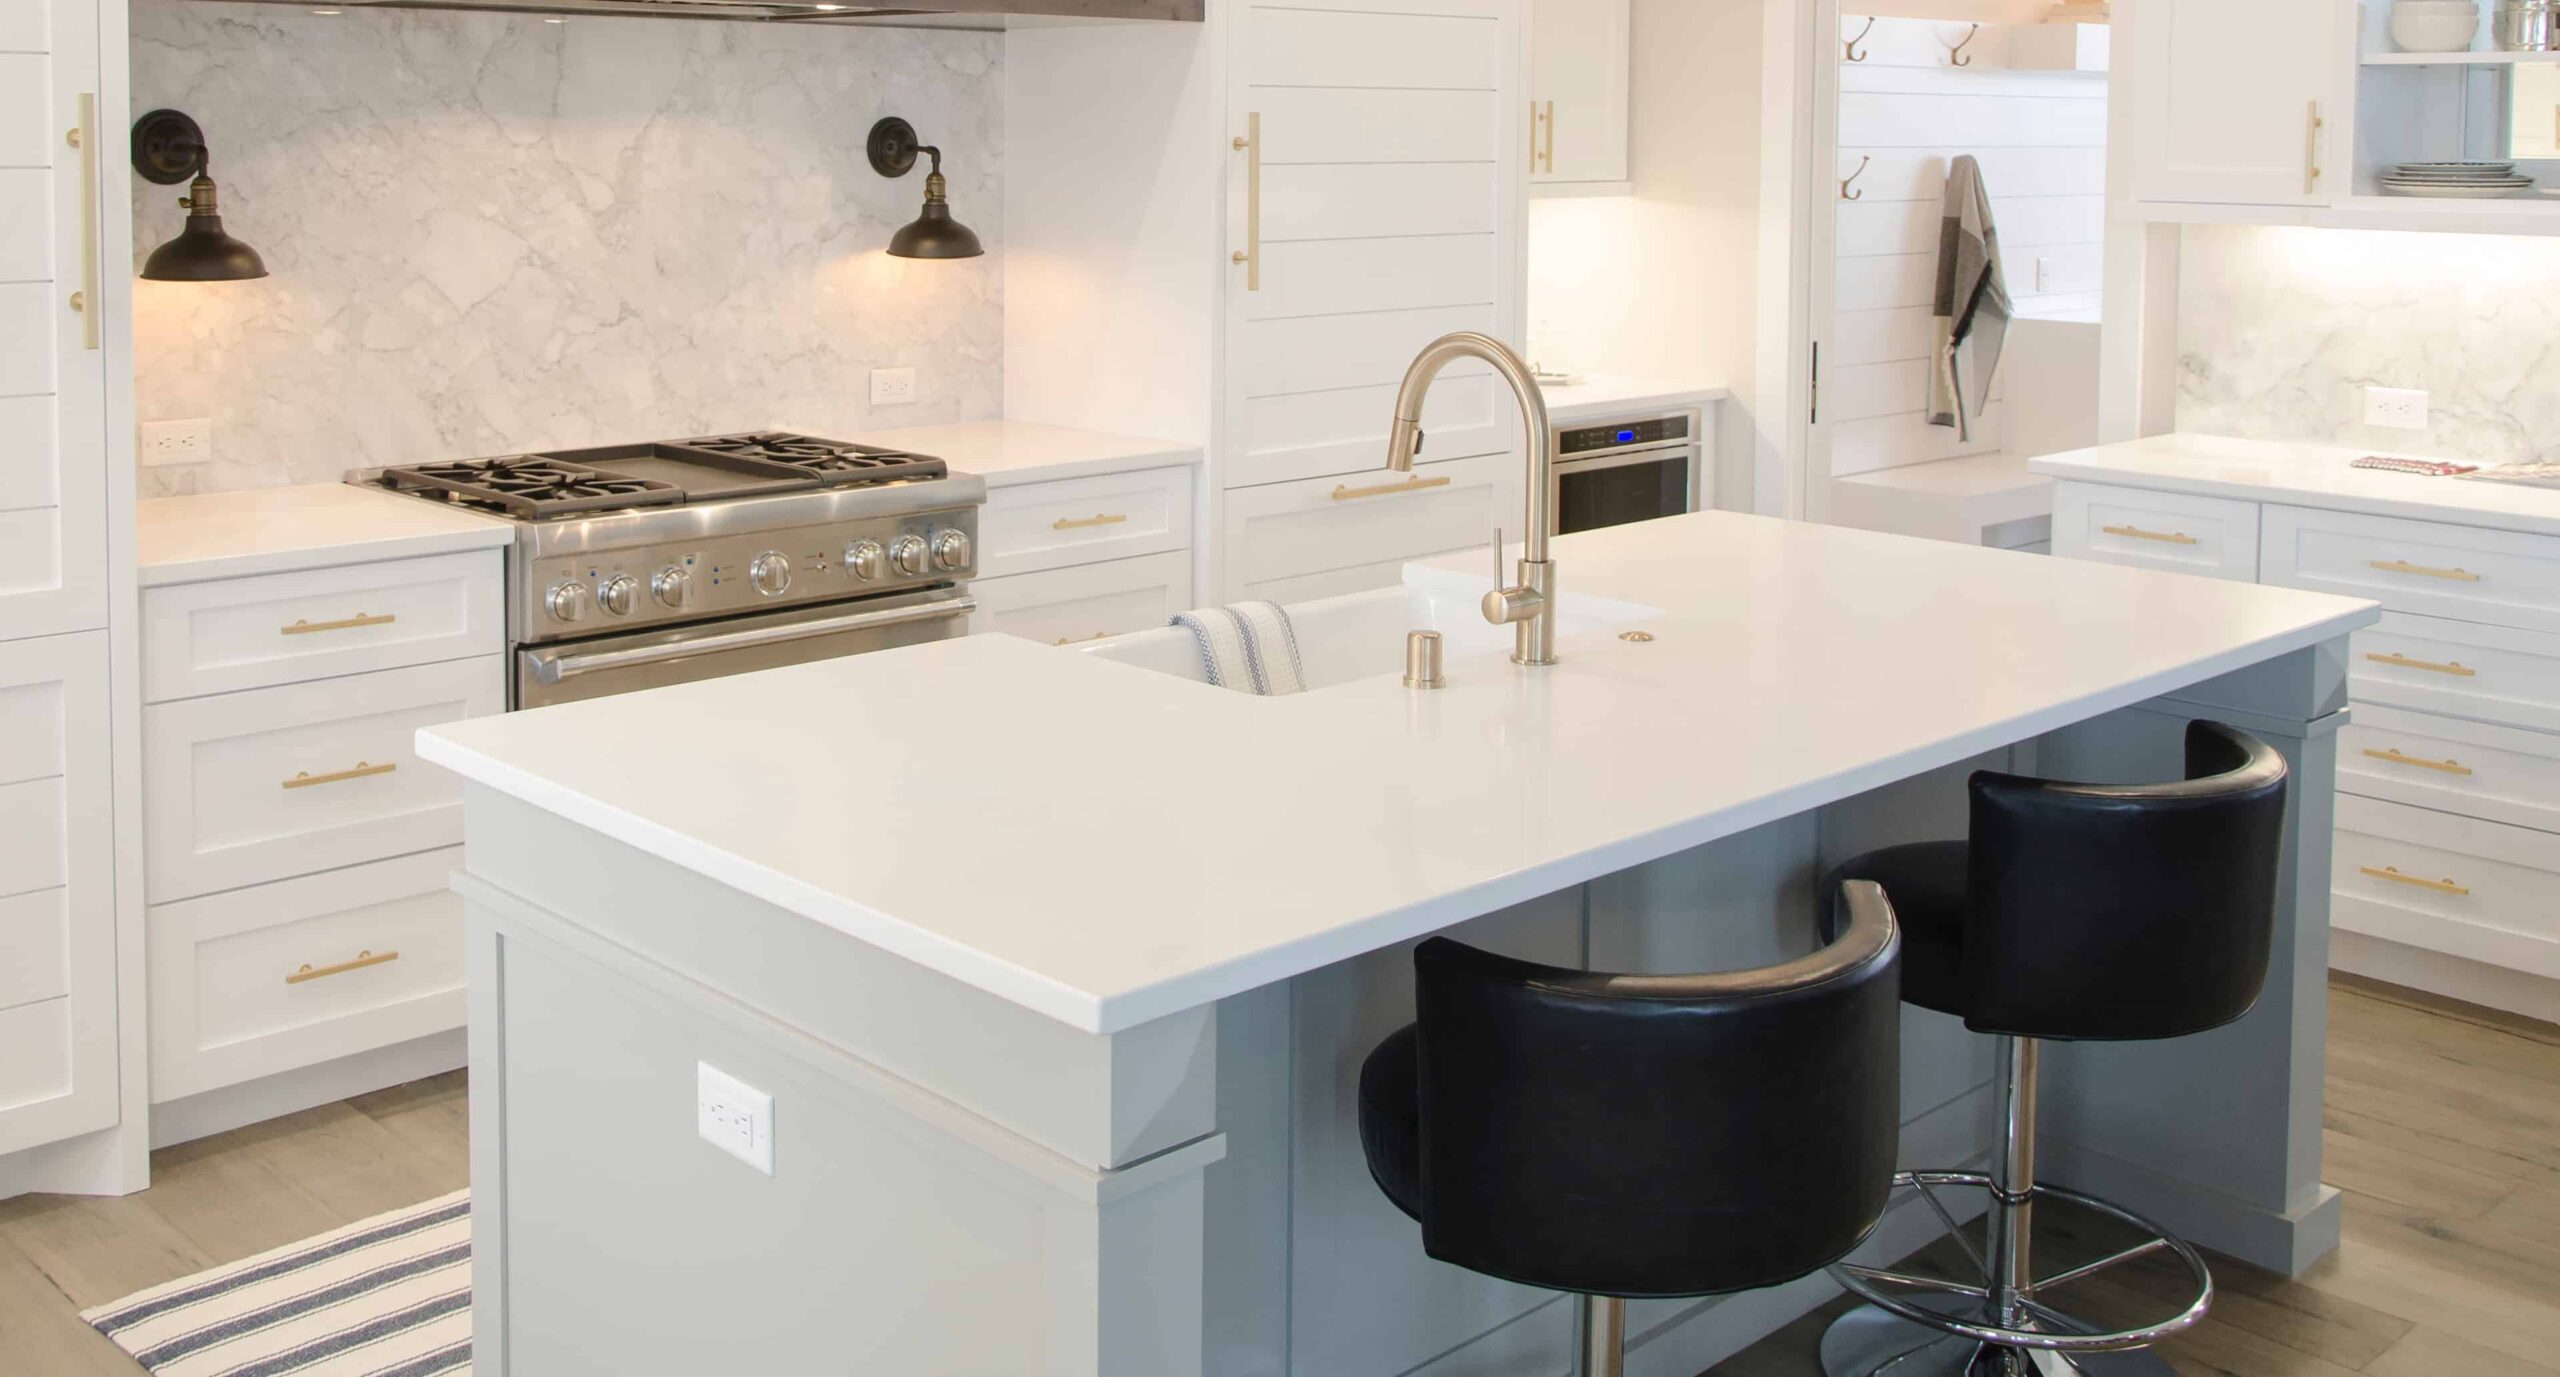 Cool countertop ideas for your kitchen